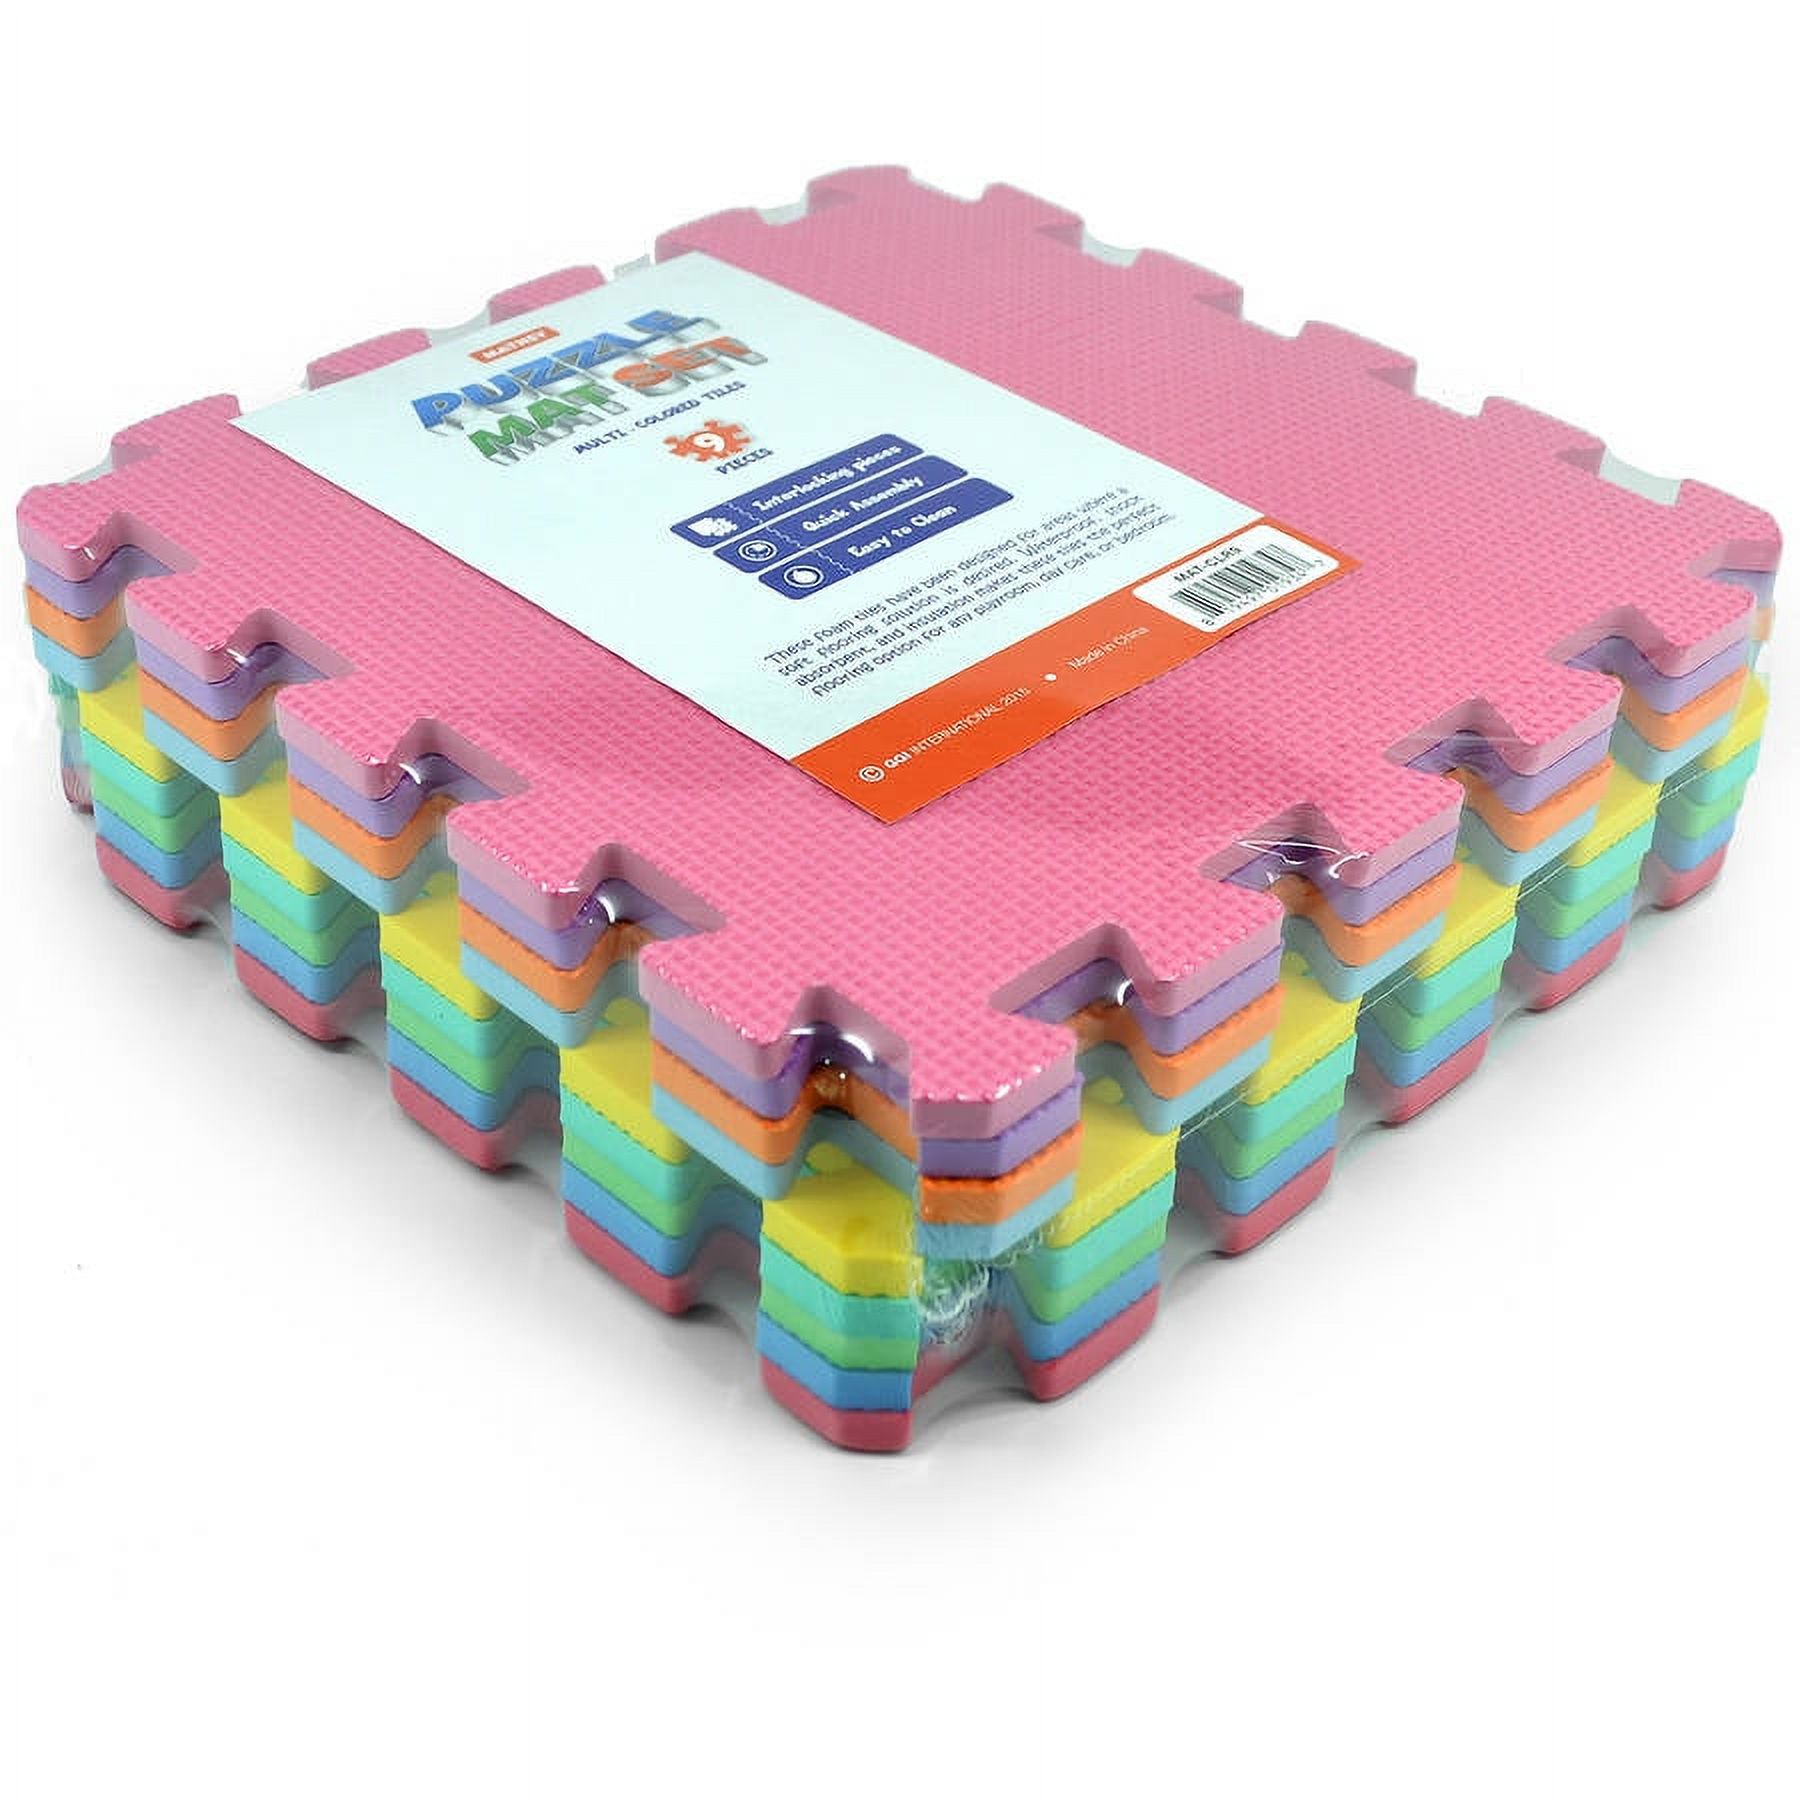 Matney Foam Floor Puzzle-Piece Play Mat, Great for Kids to Learn and Play, 9 Tile Pieces - image 1 of 6